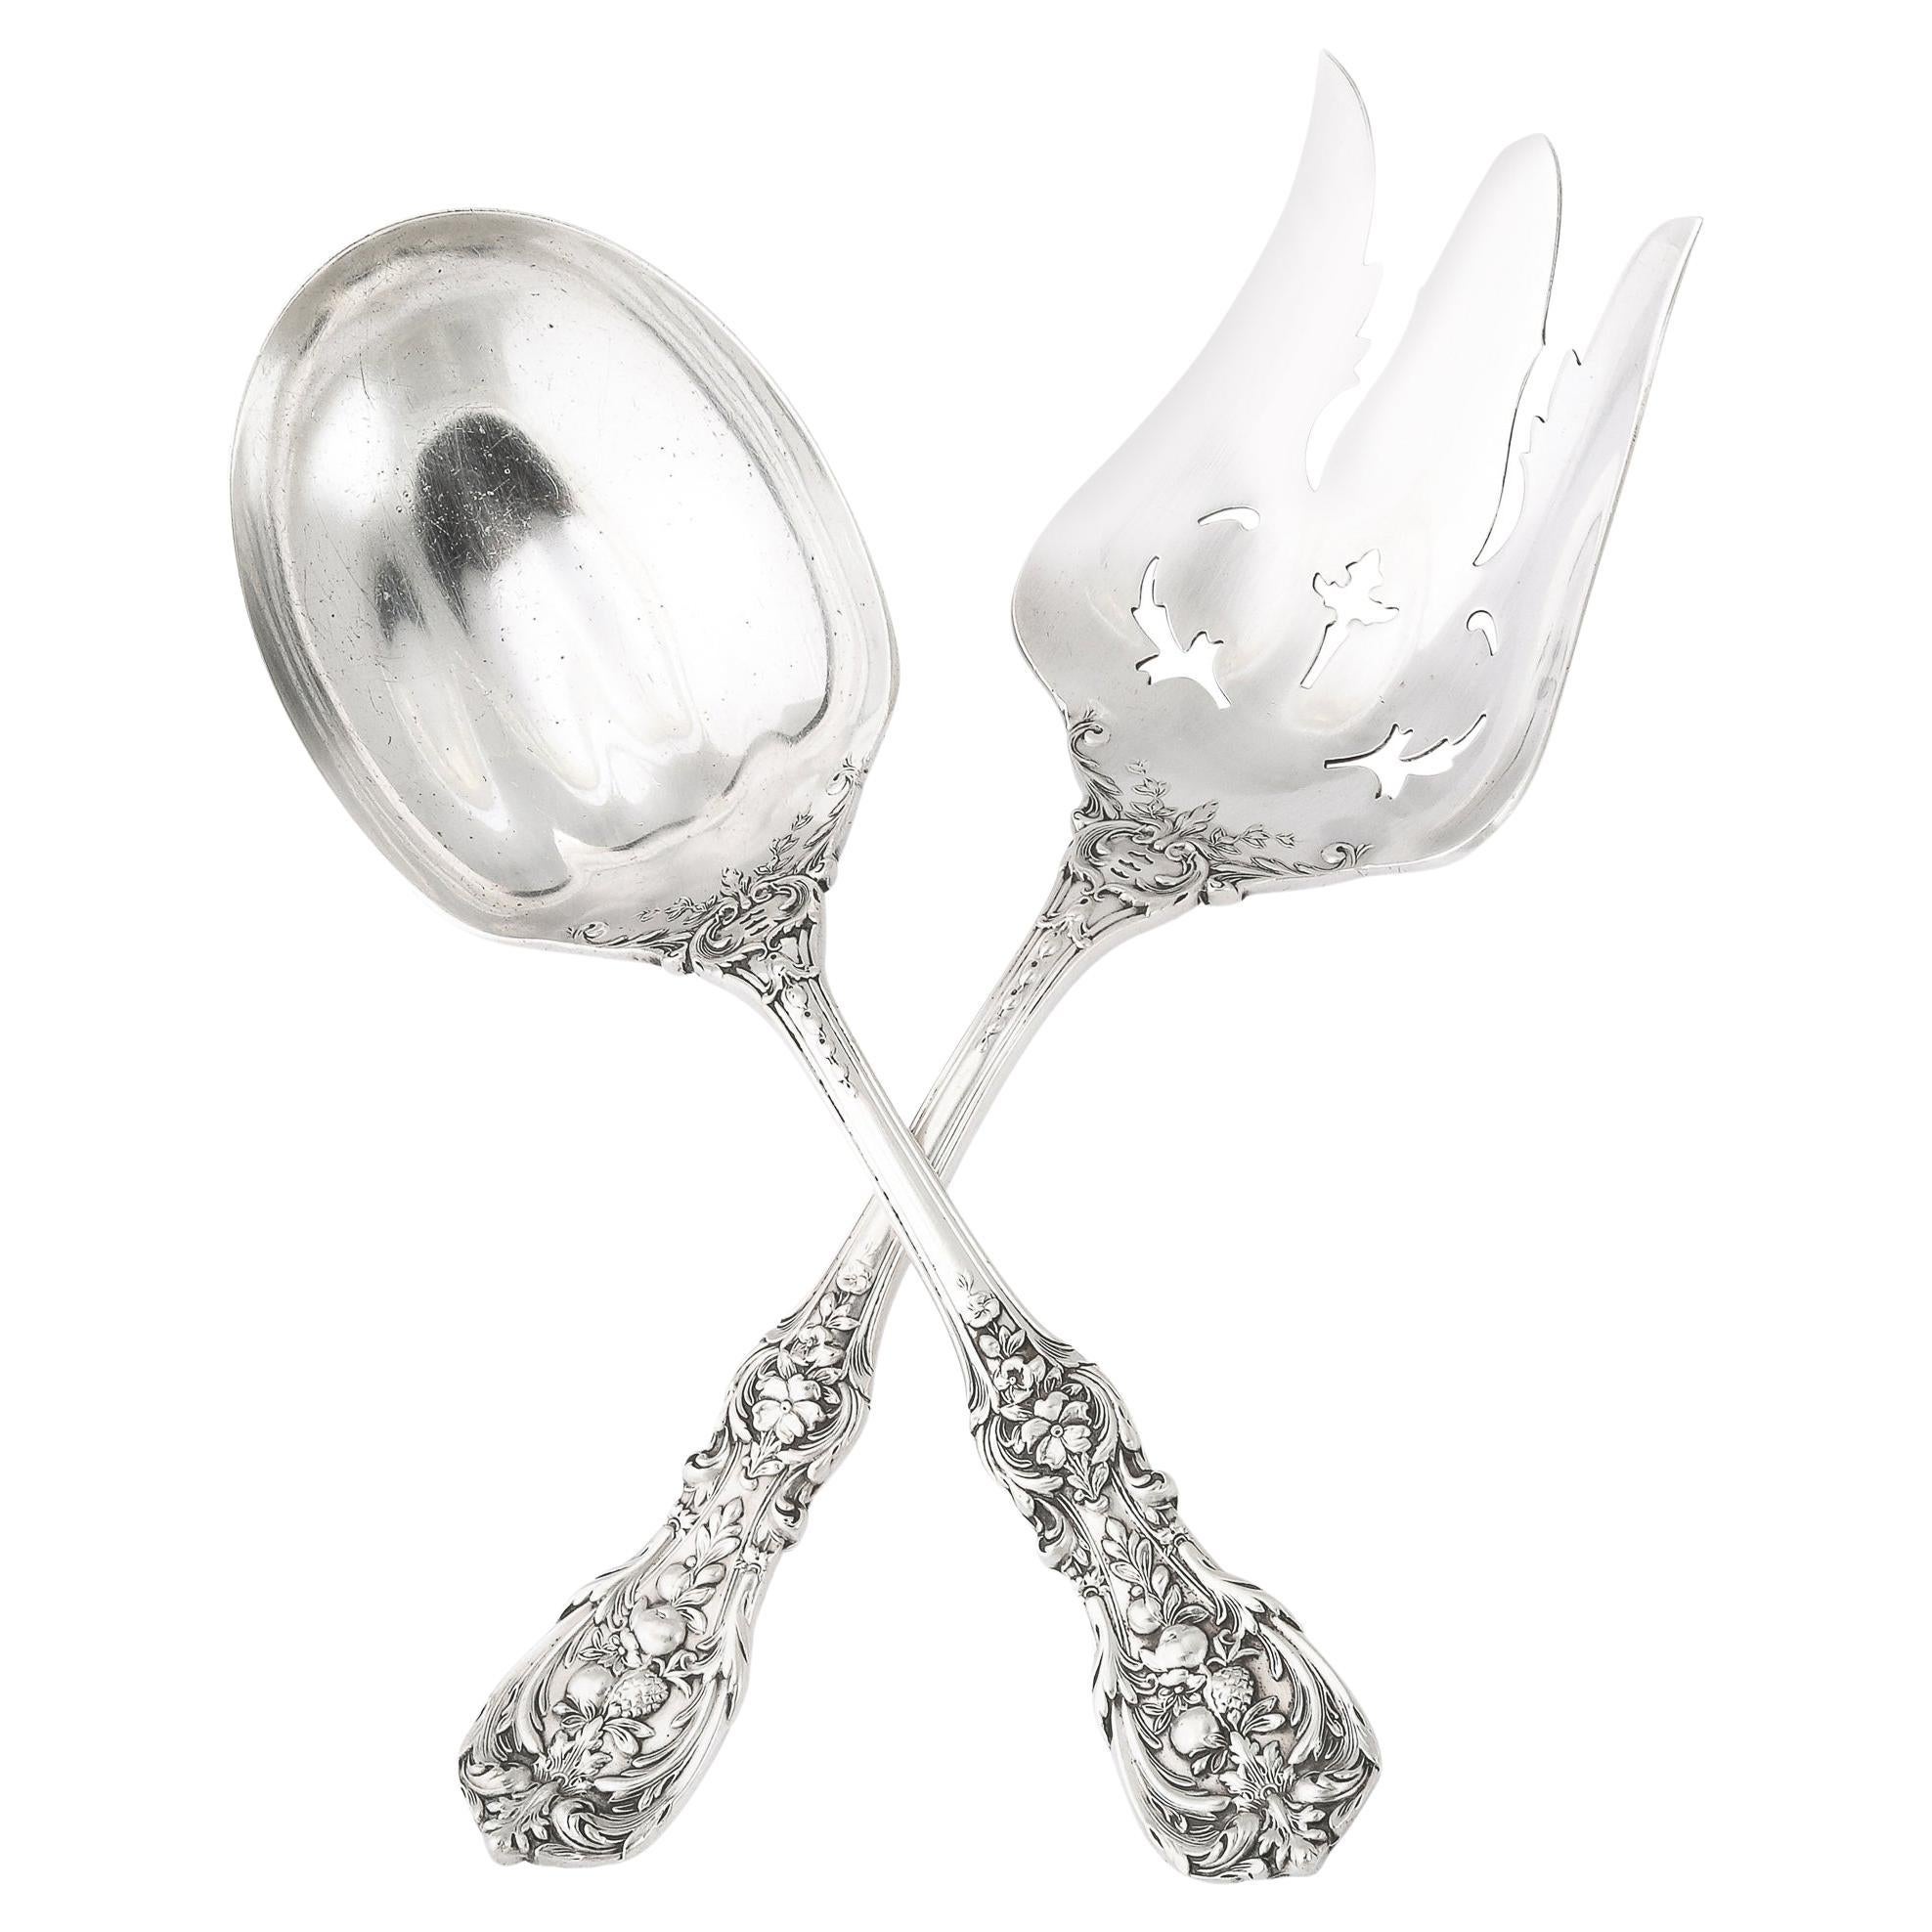 Reed and Barton Francis I Pattern Sterling Silver Serving Spoon & Fork Set  For Sale